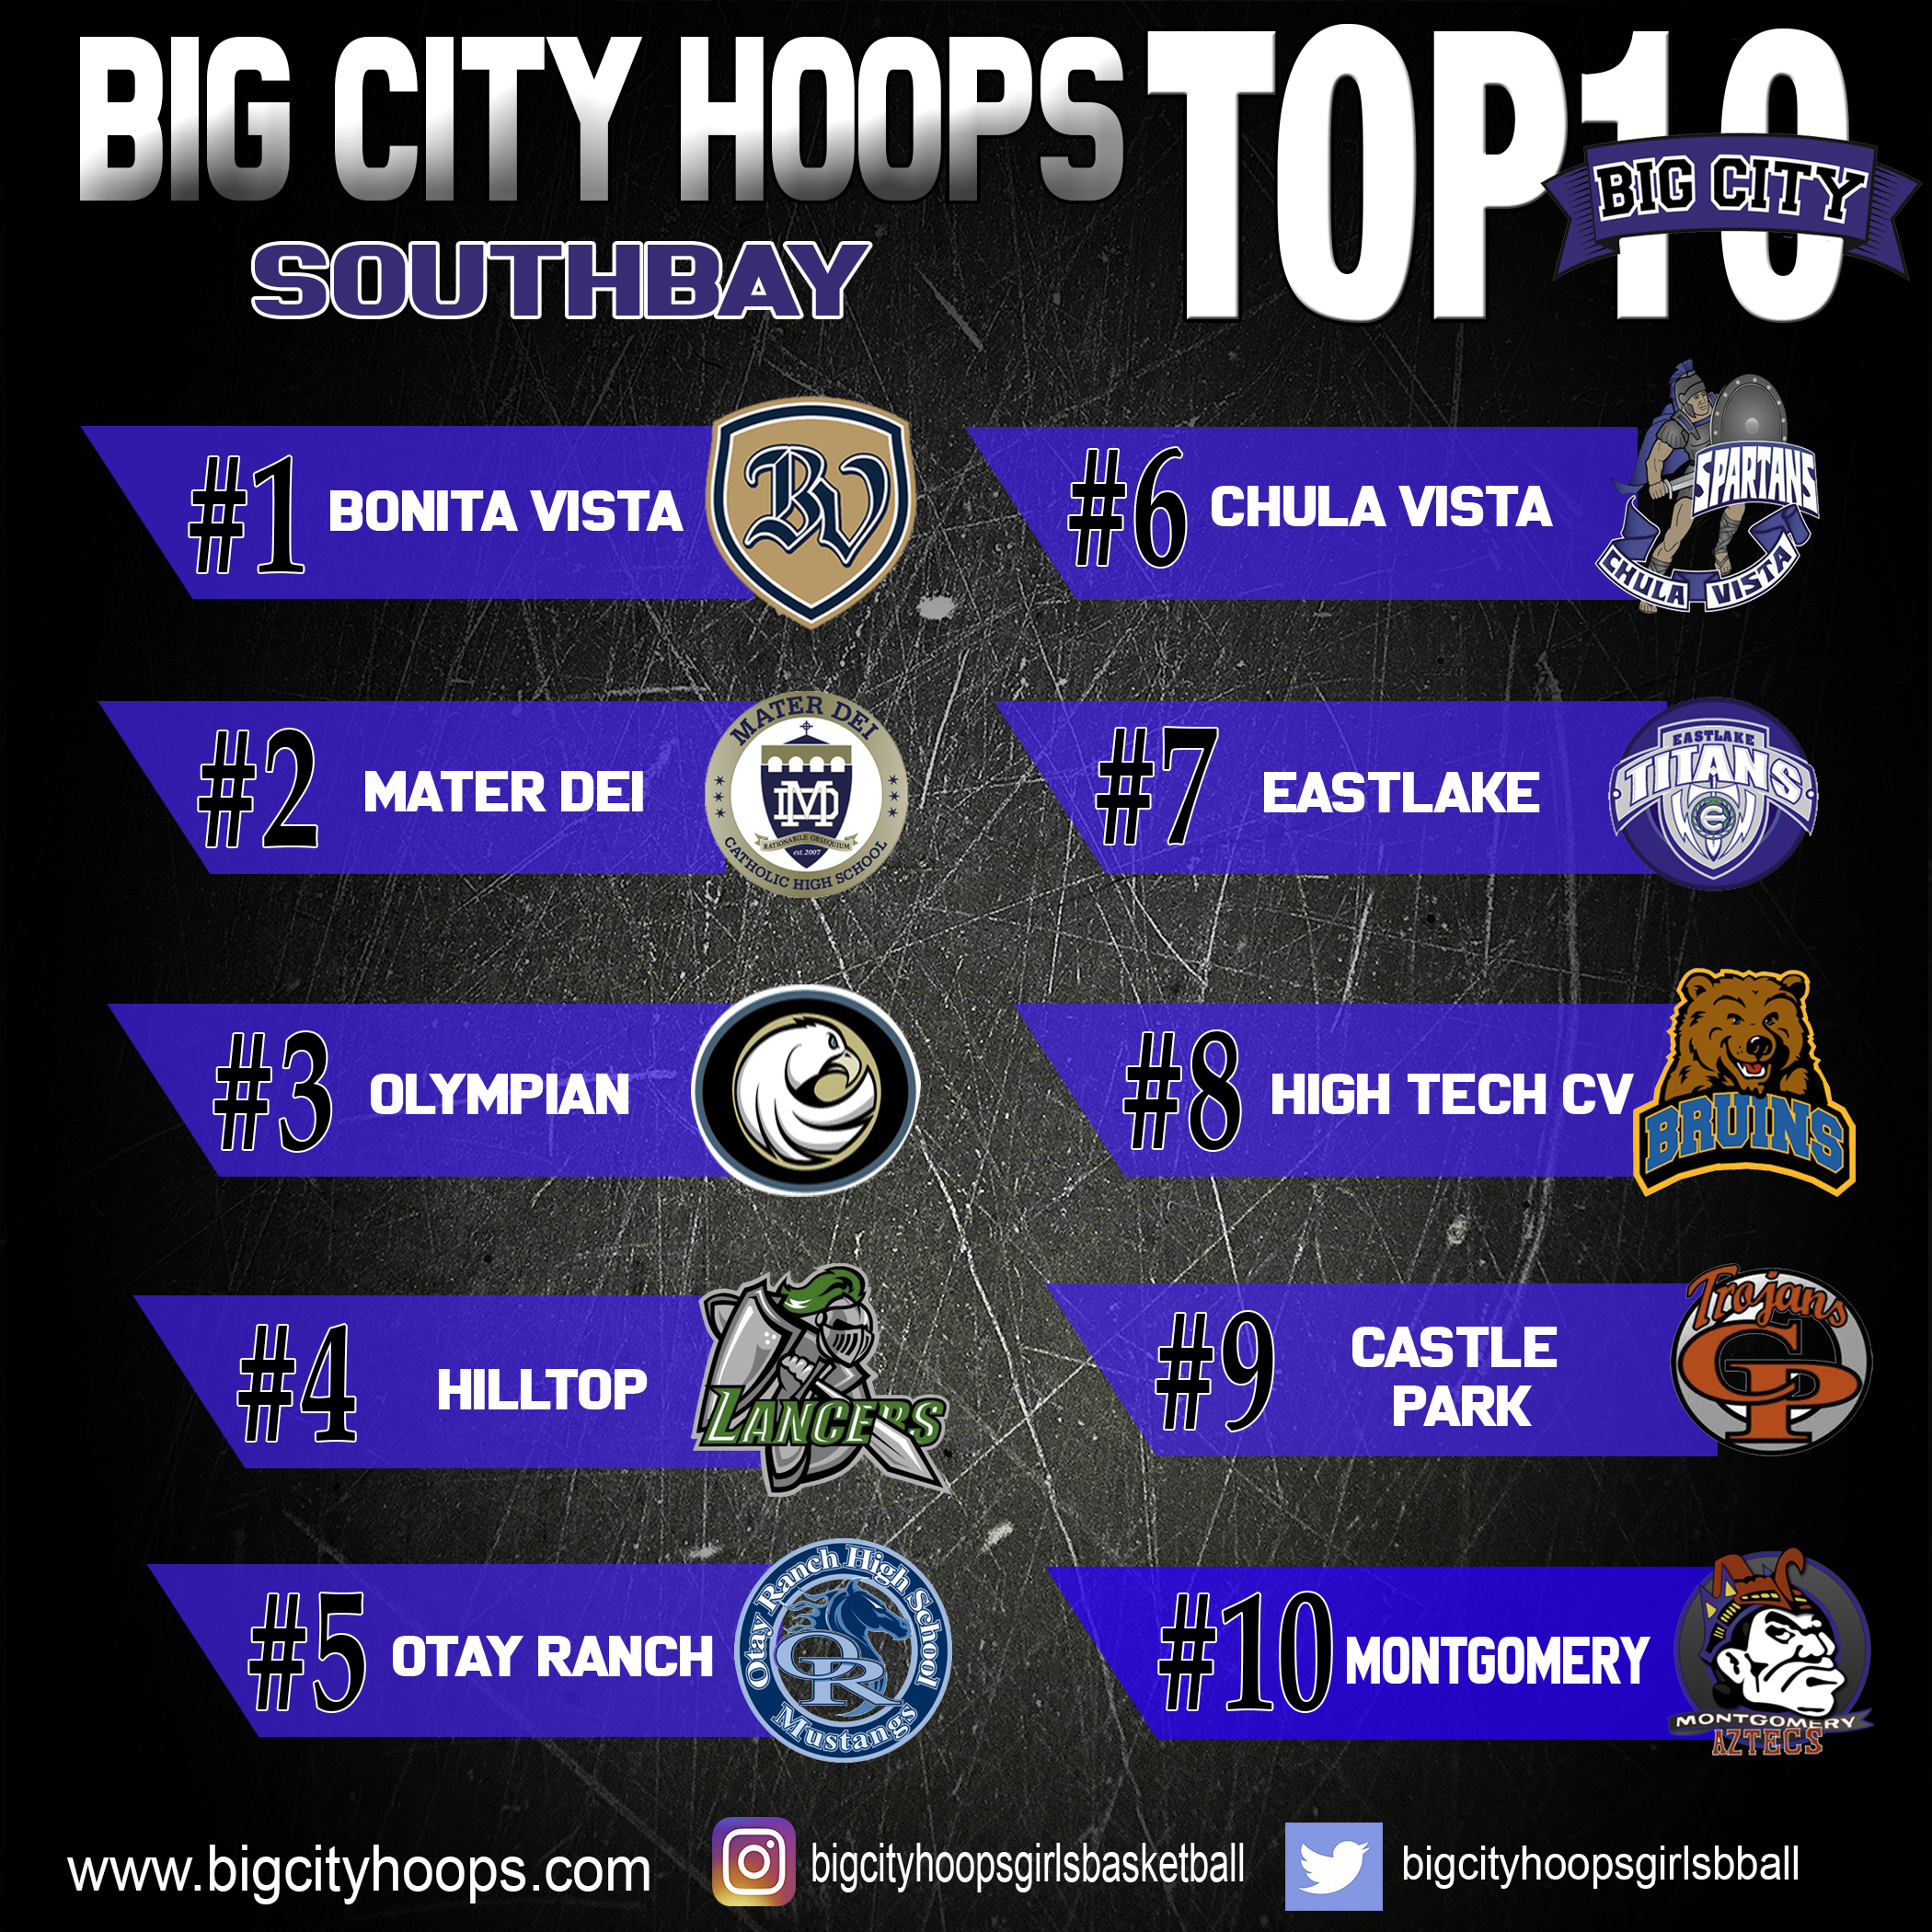 A graphic of the top 1 0 teams in big city hoops.